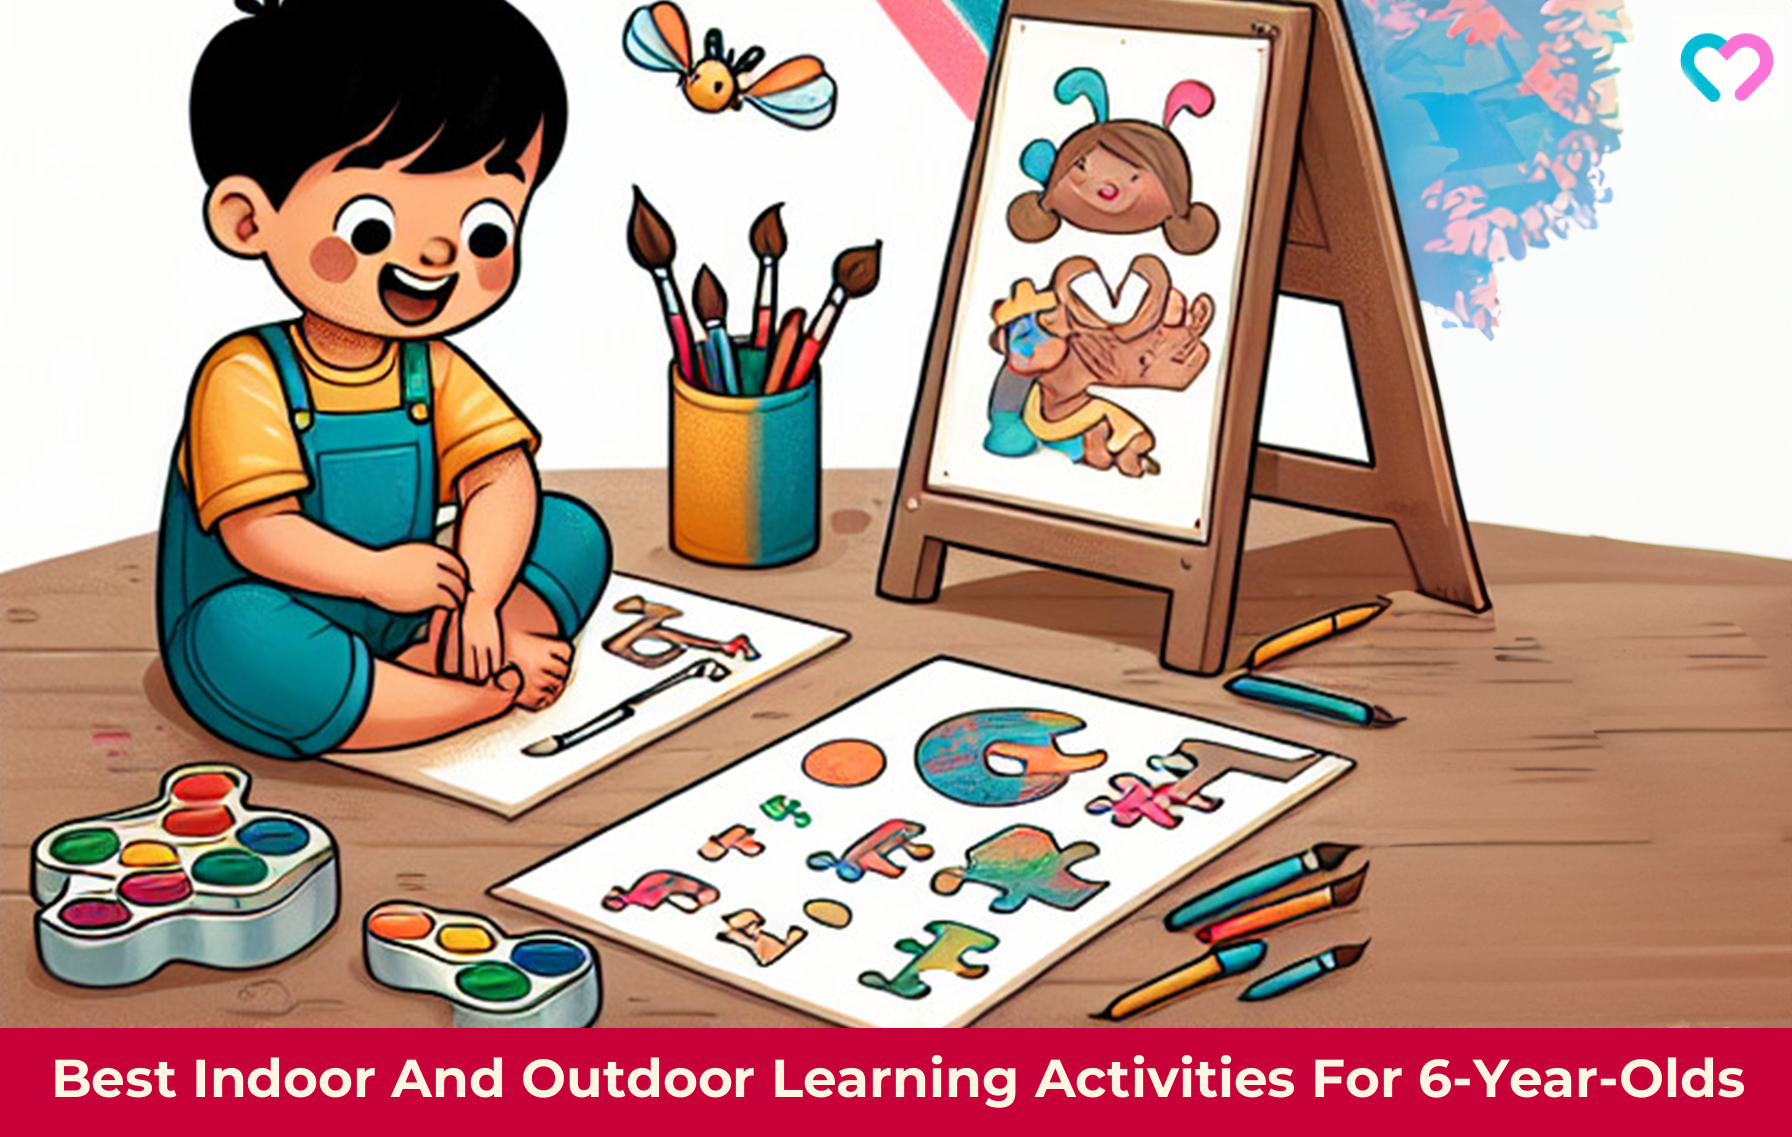 Activities For 6-Year-Olds_illustration